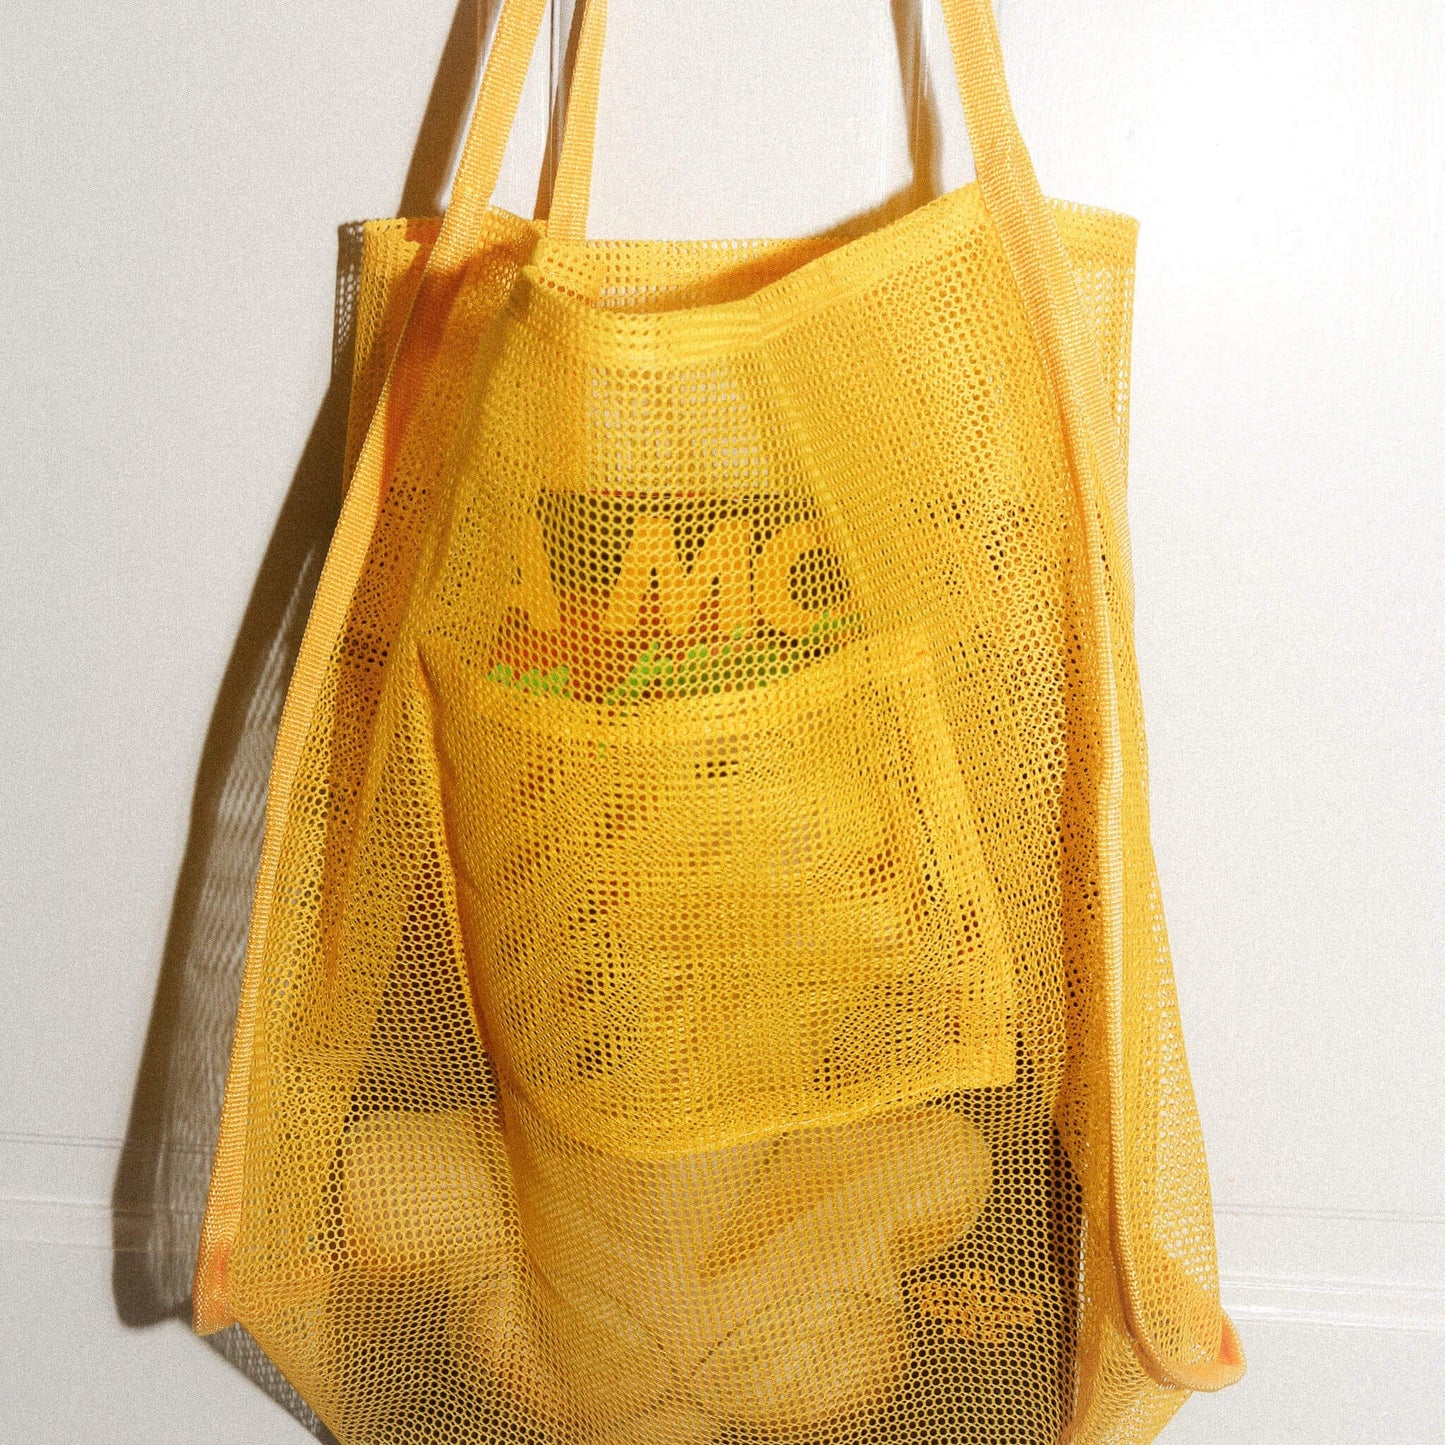 Sunday Forever Apparel & Accessories NEW! Mesh Tote Bag